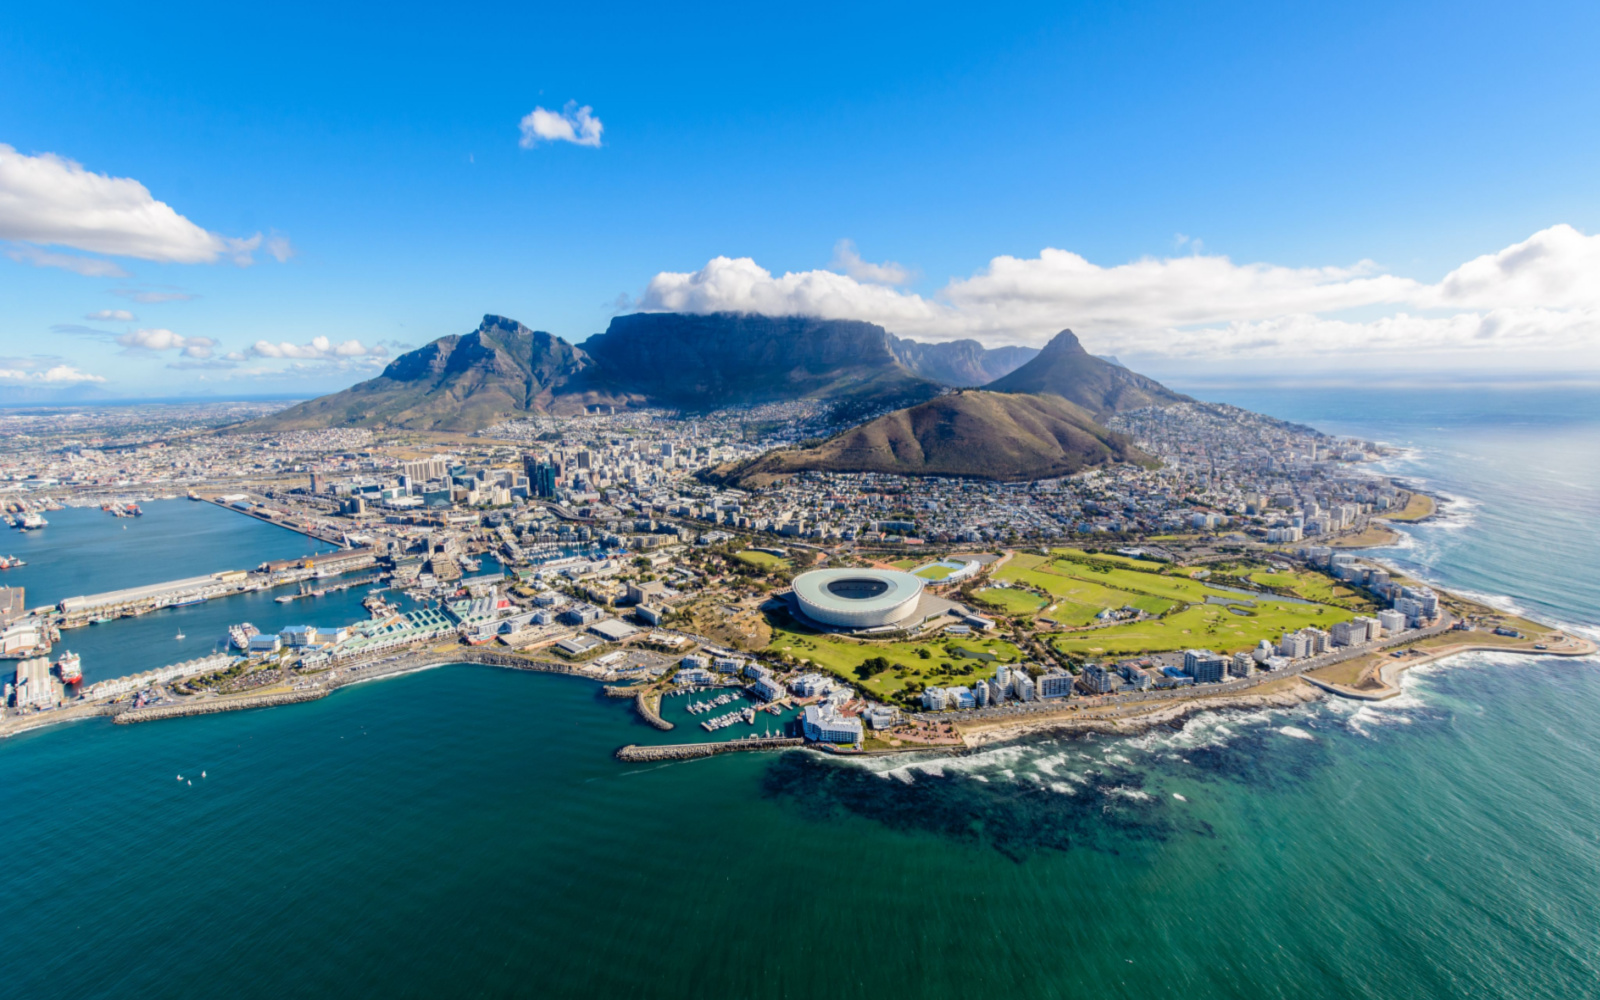 Is Cape Town Safe? | Travel Tips & Safety Concerns